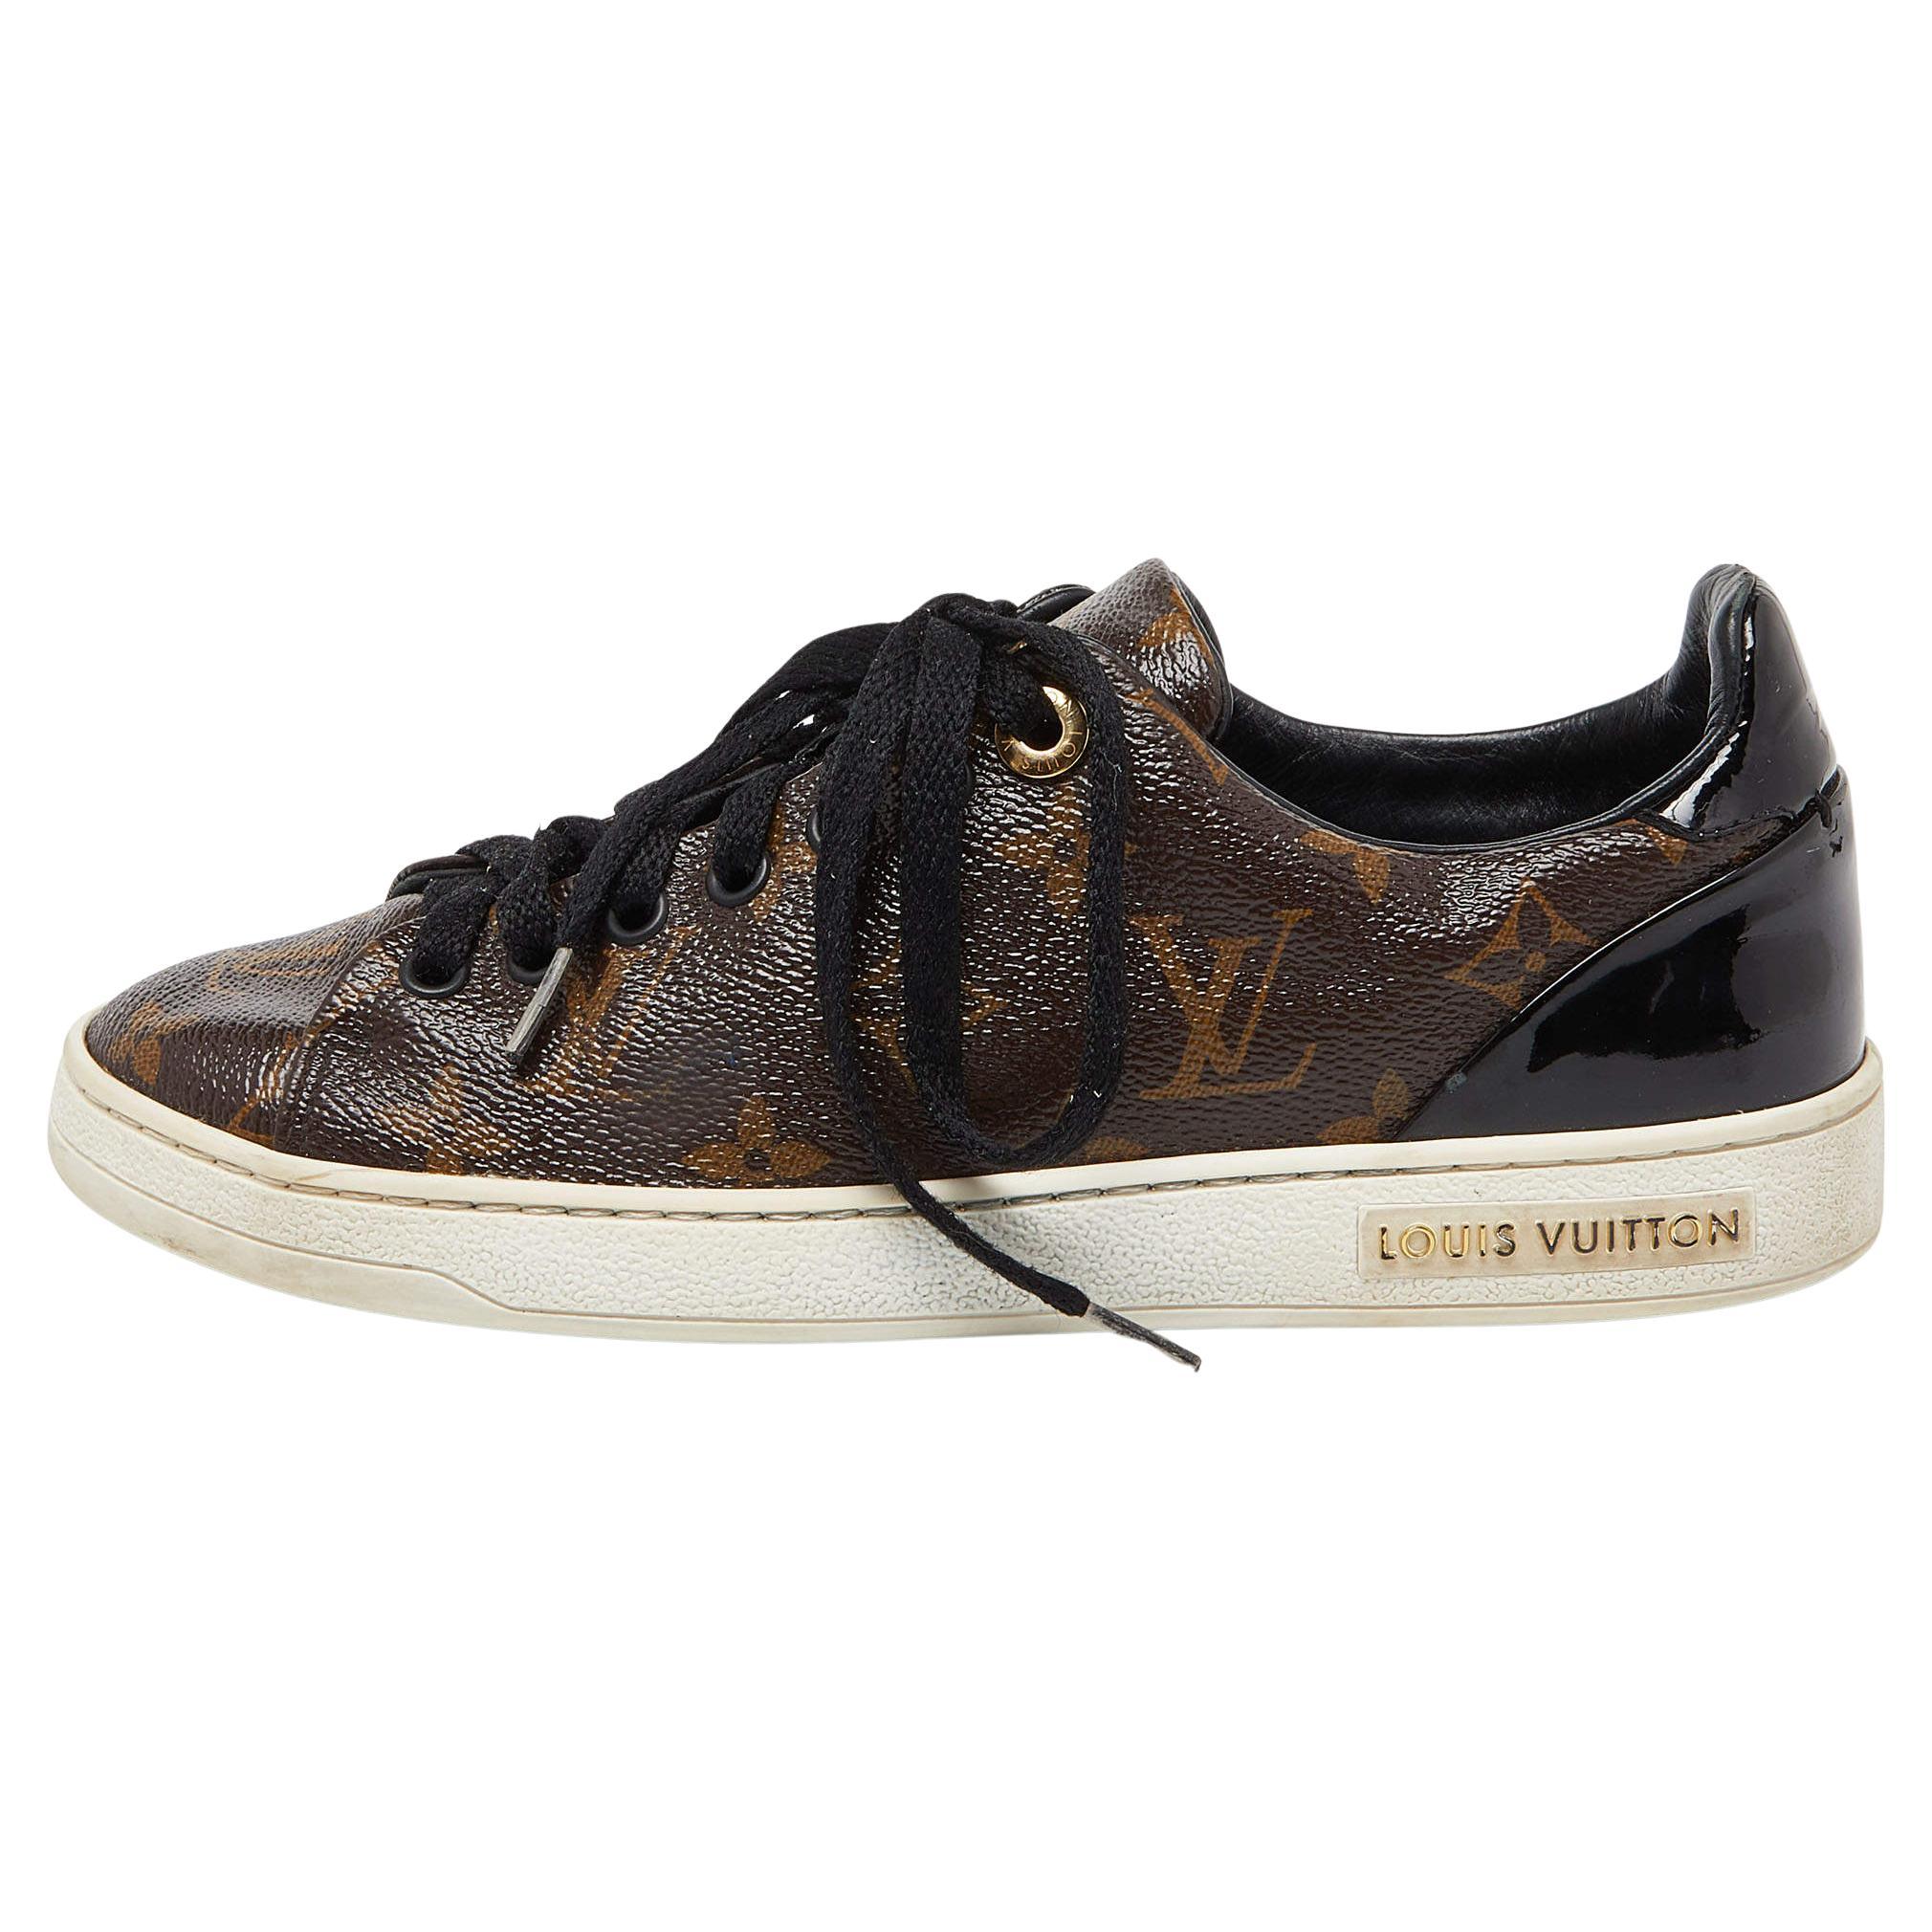 Louis Vuitton Monogram Canvas and Patent Leather Frontrow Sneakers Size 36 For Sale